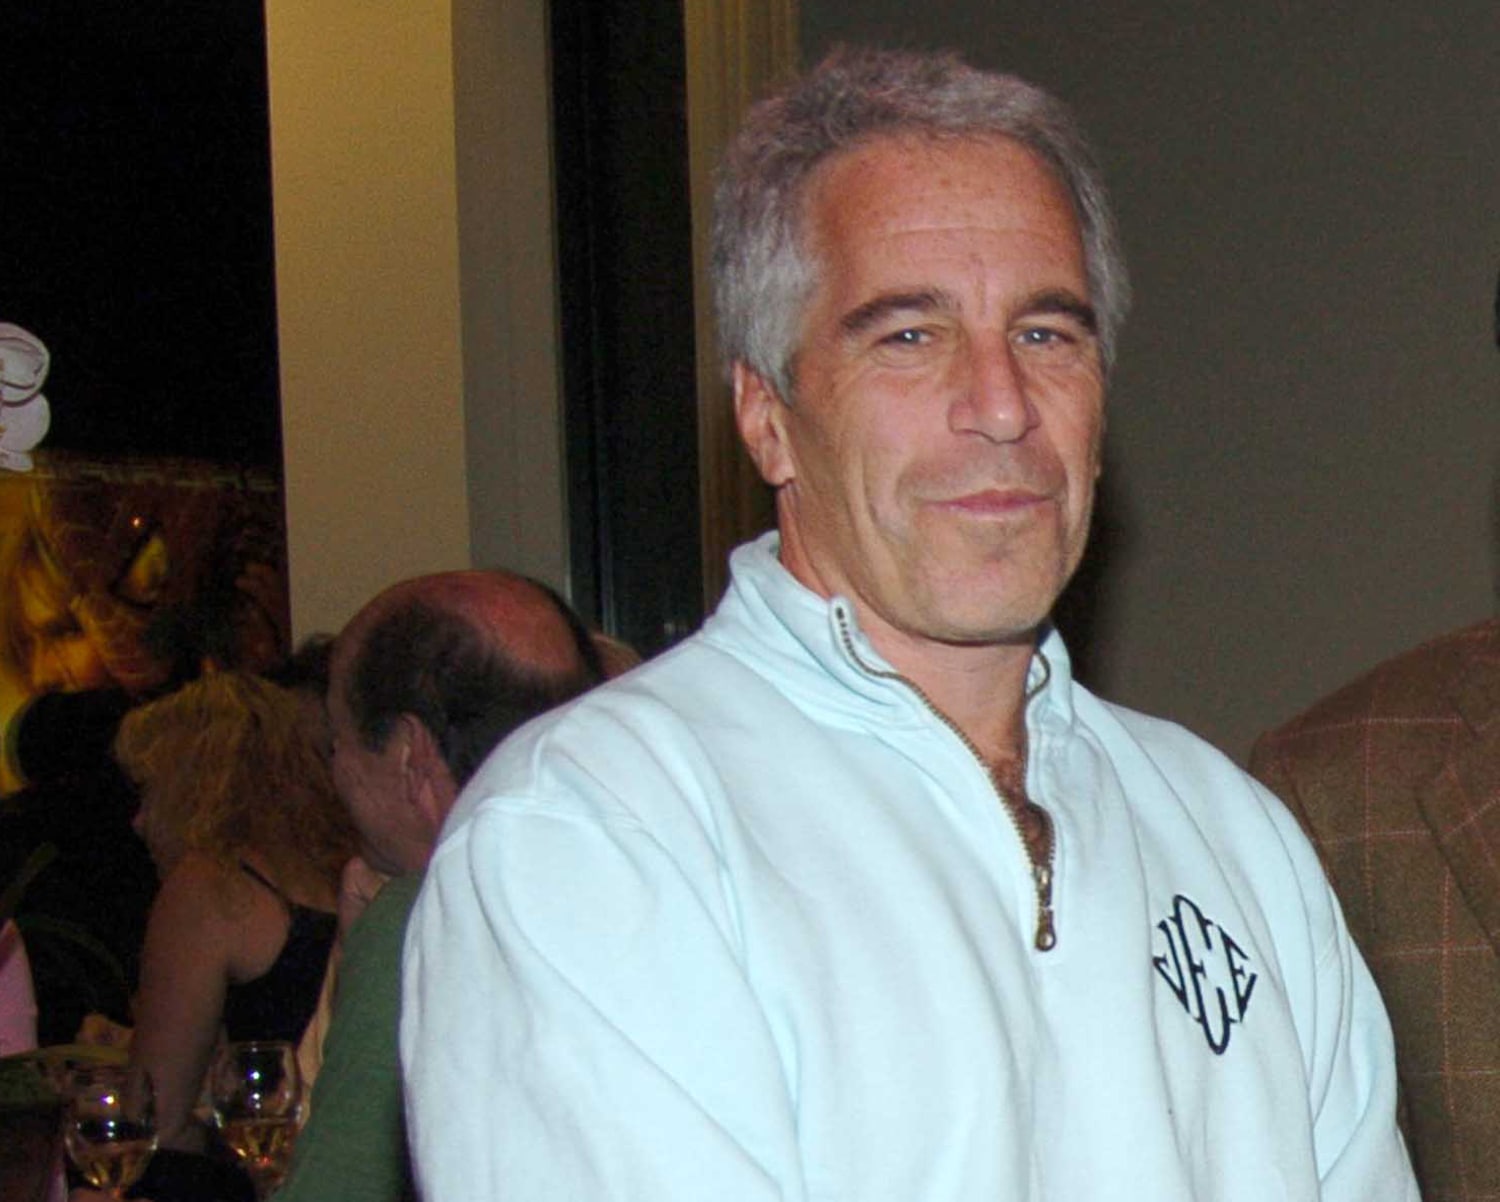 Jeffrey Epstein victims fund paid out $121 million to about 150 people